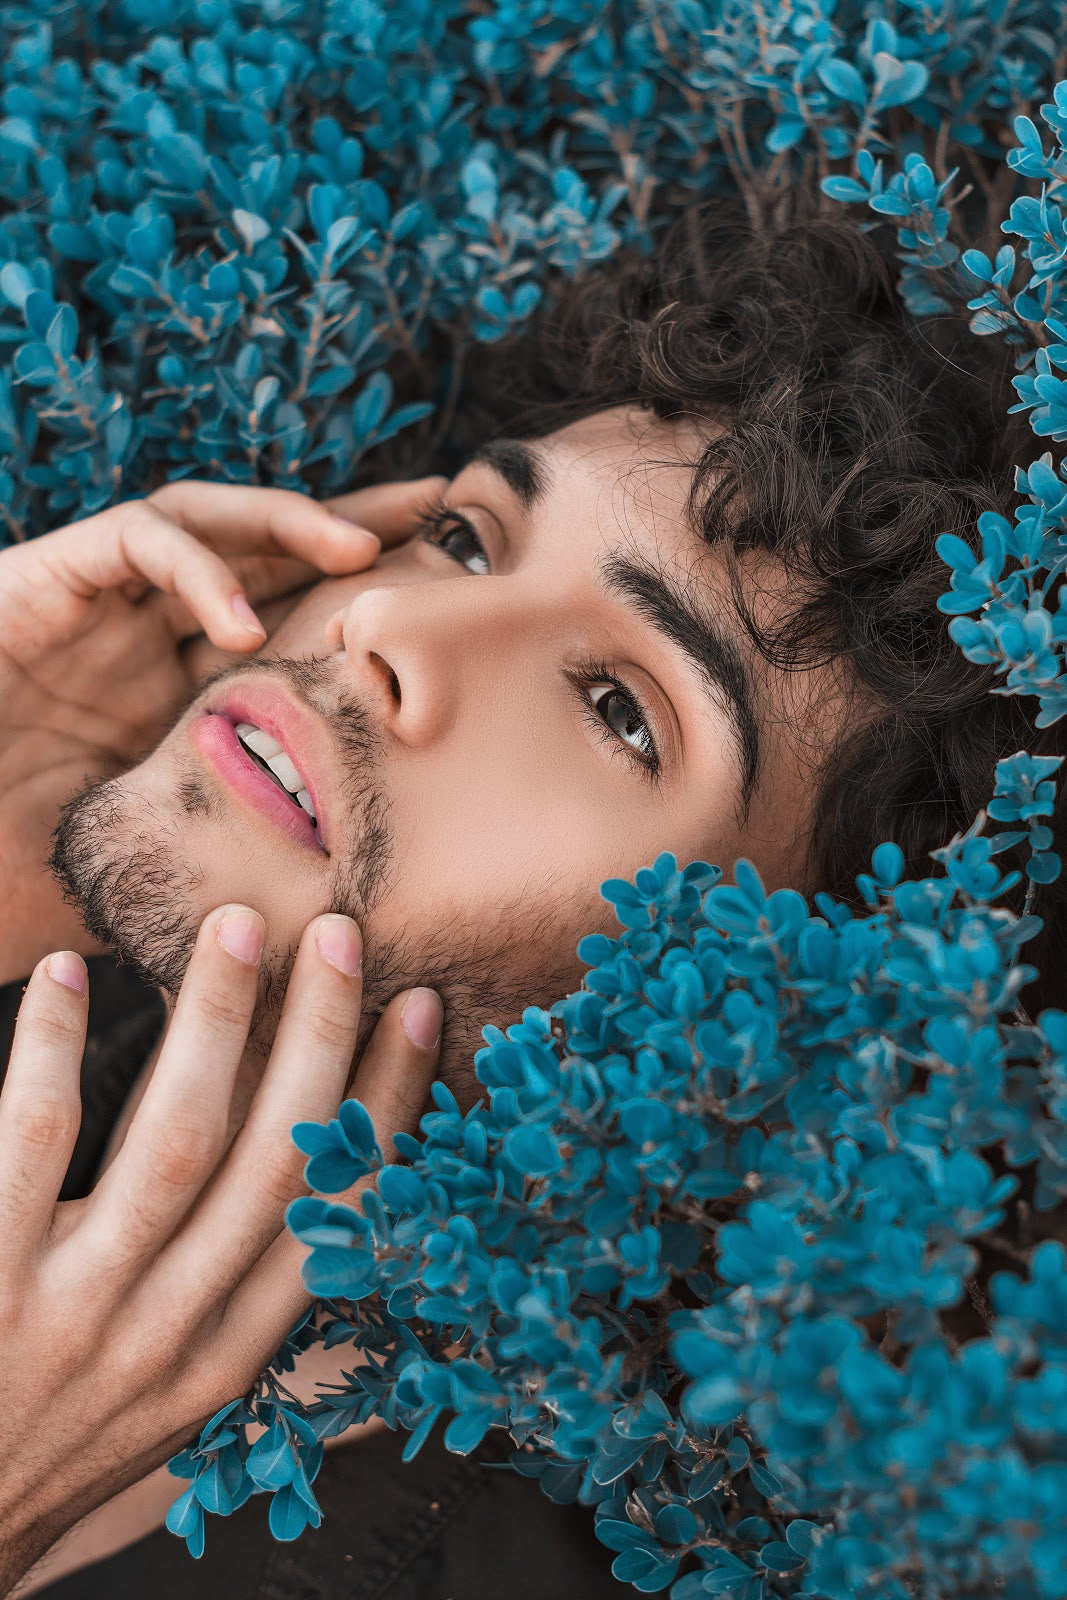 Man Touching Face Surrounded by Blue Foliage | Style Standard